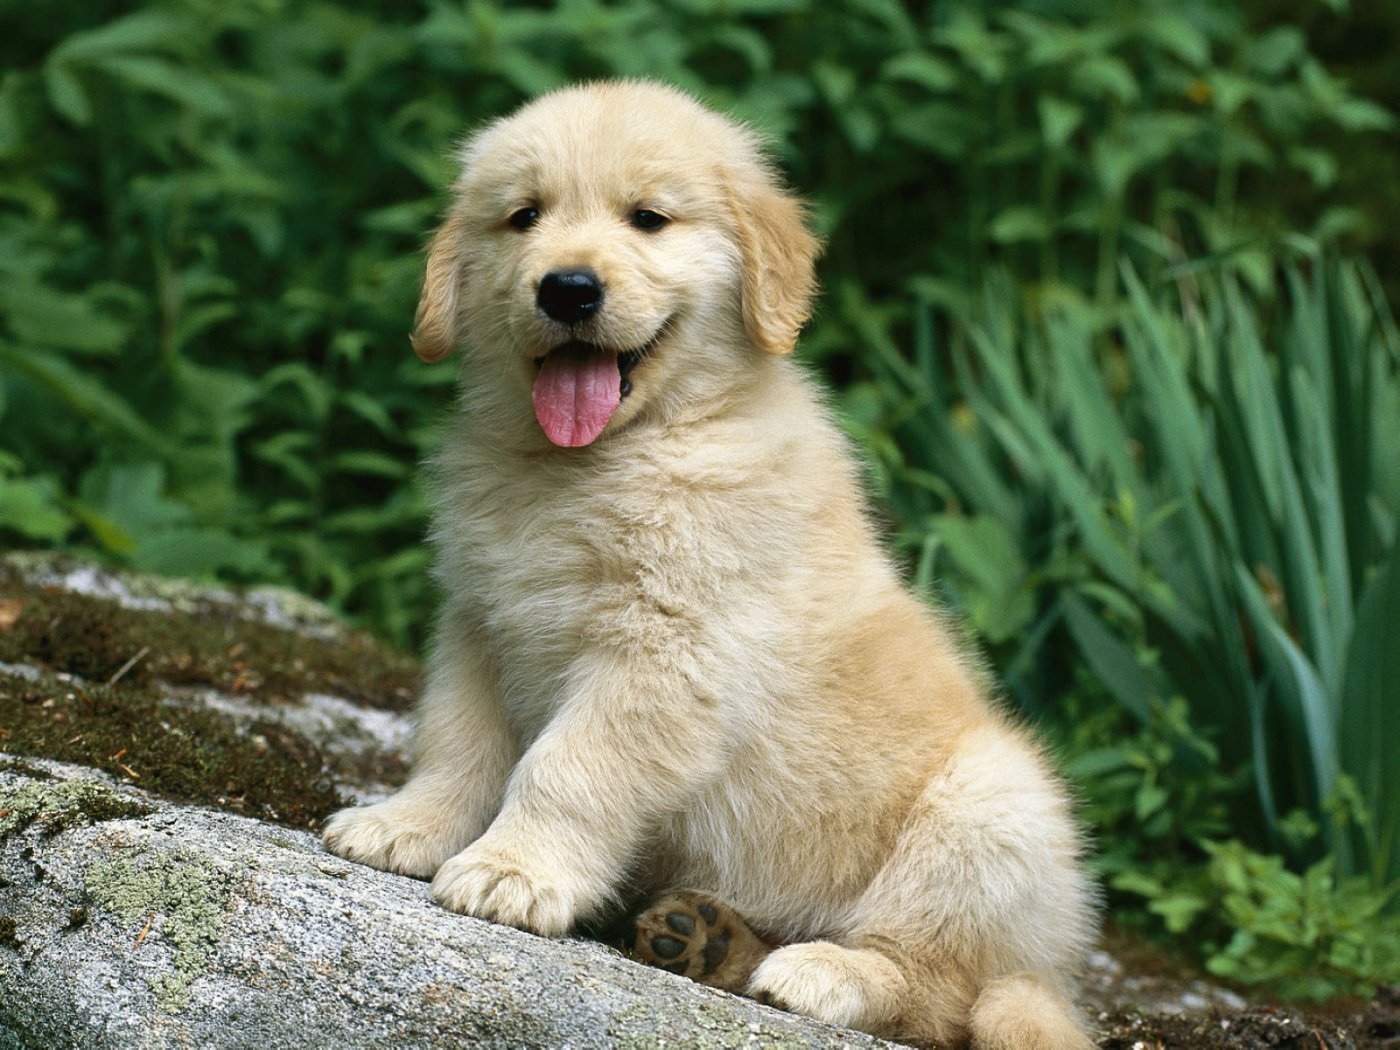 images of a golden retriever dog download